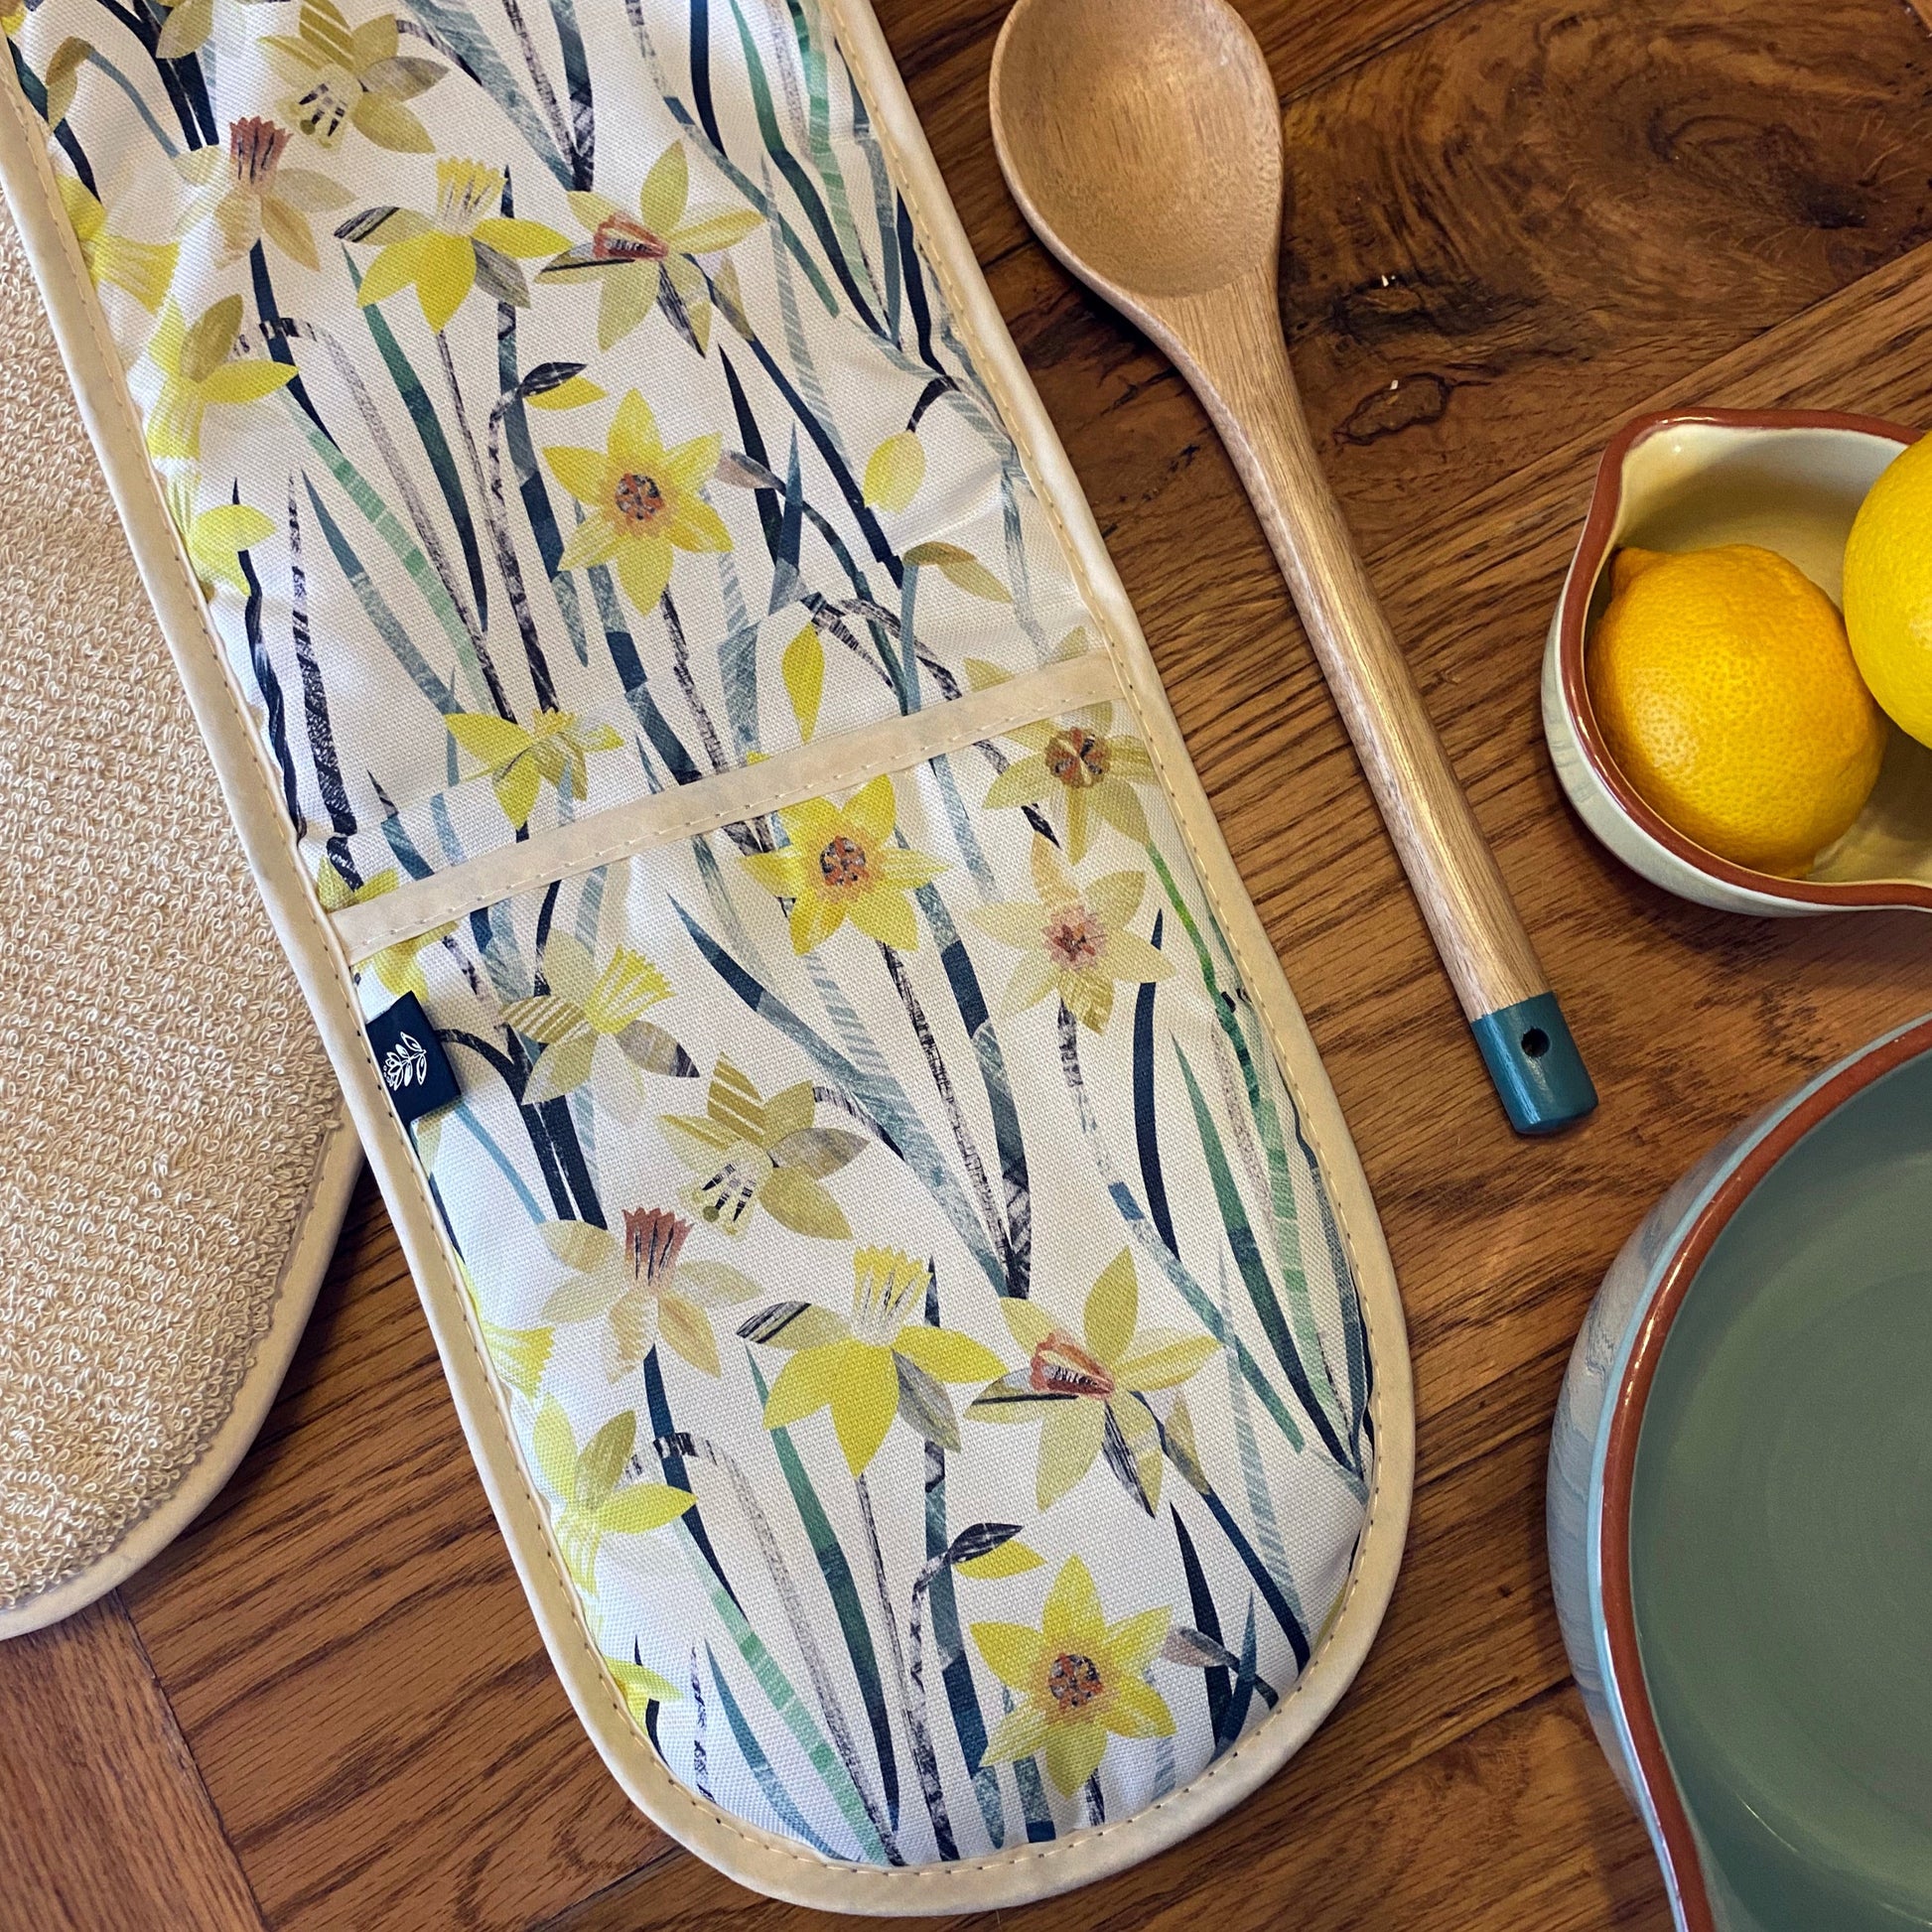 Daffodil Oven Gloves featuring one of Bianca's unique collaged designs.  These Oven Gloves have a thick thermal layer and they have a Ecru cotton towelling backing for added protection.